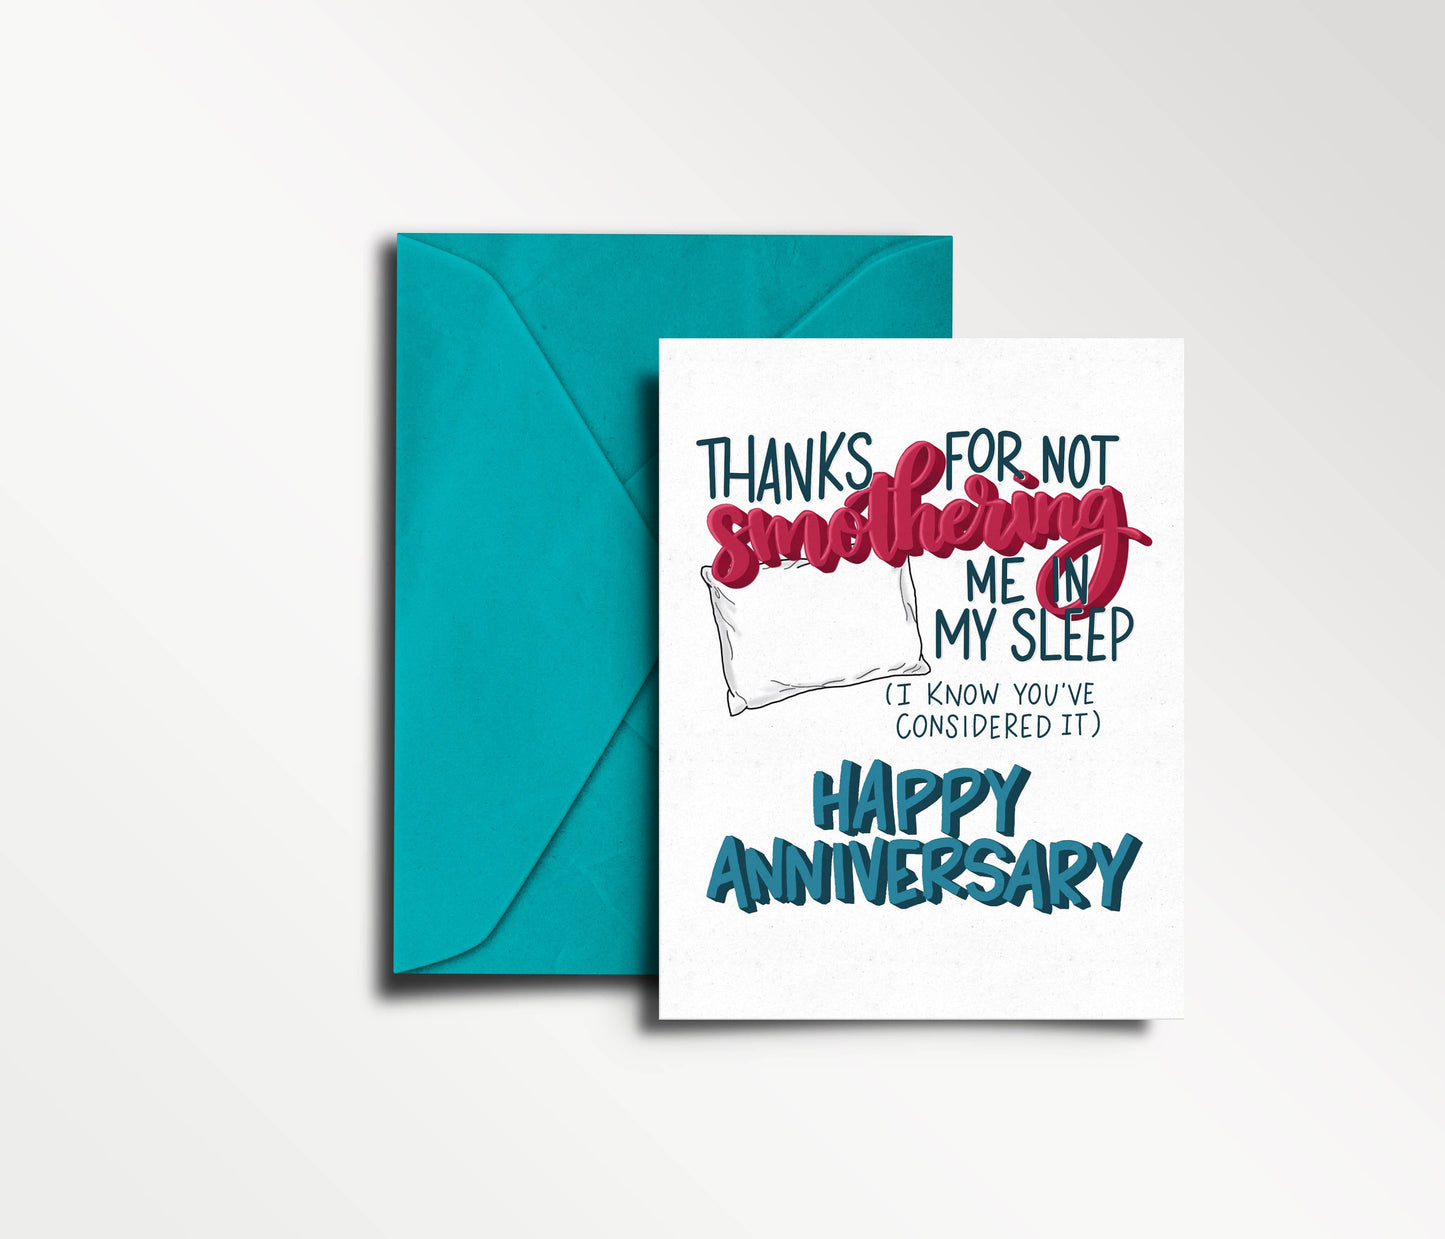 Thanks For Not Smothering Me In My Sleep - Anniversary Card